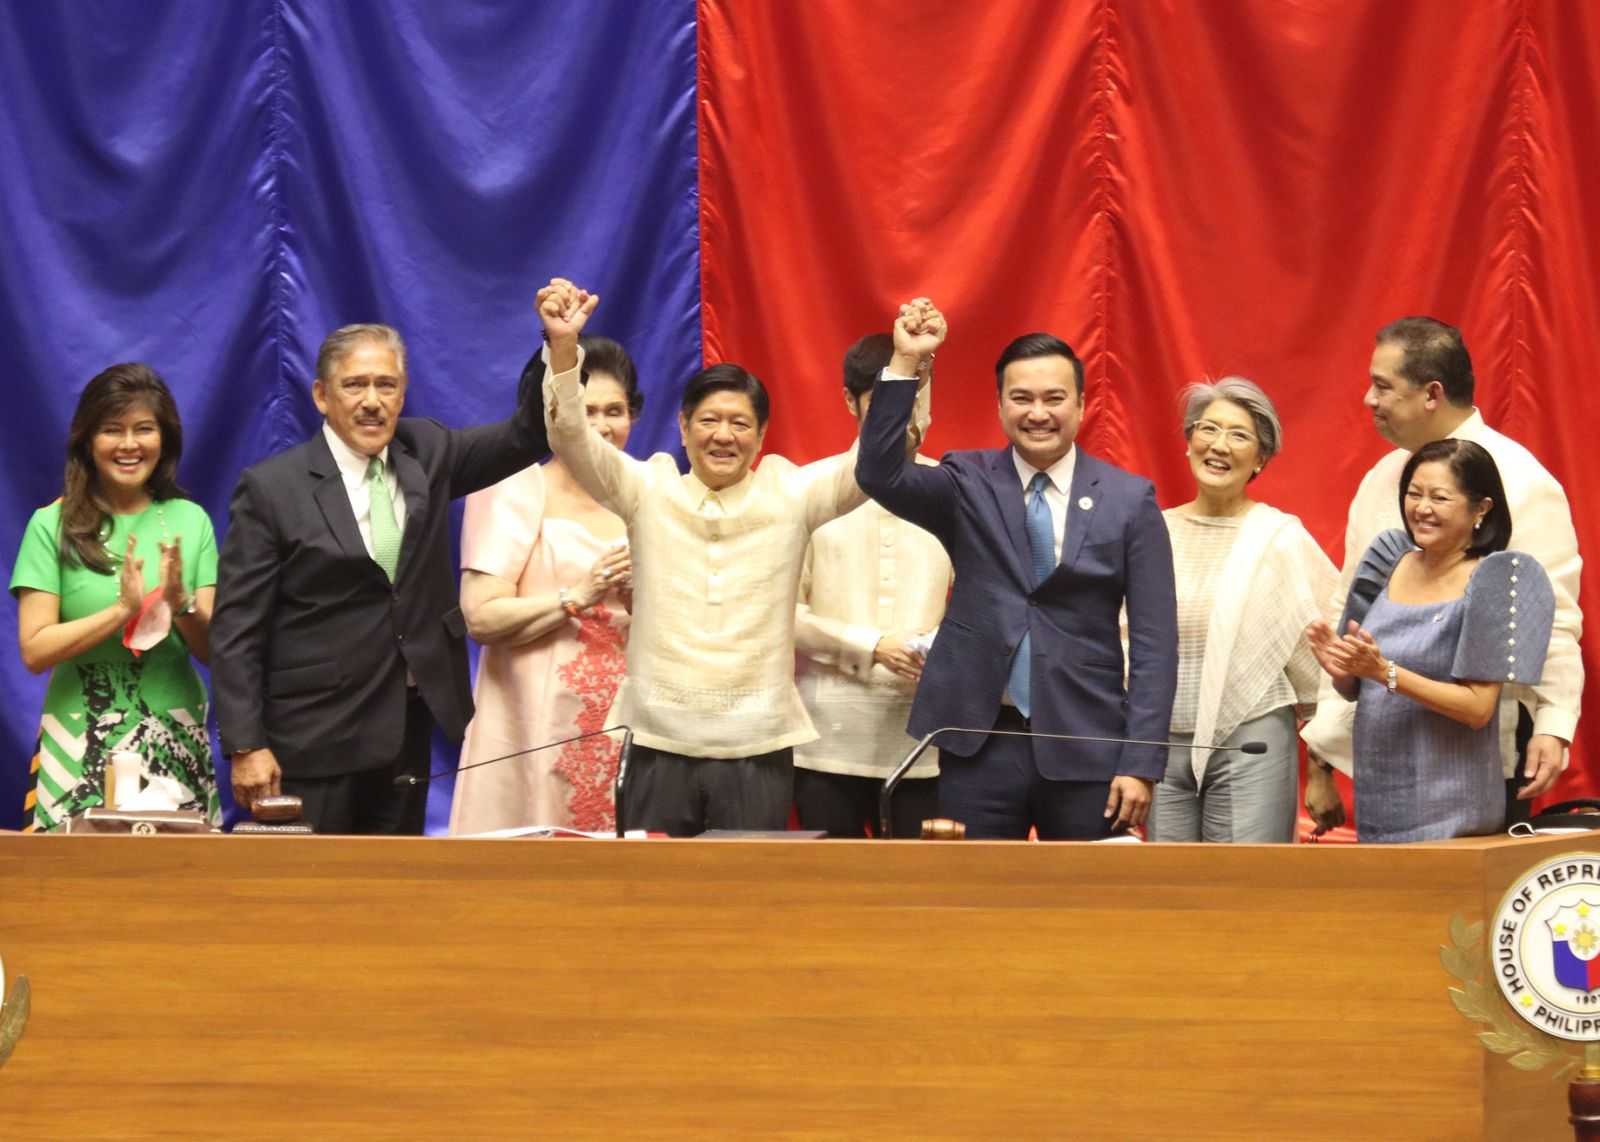 House adopts measure thanking PBBM for 'invaluable support'